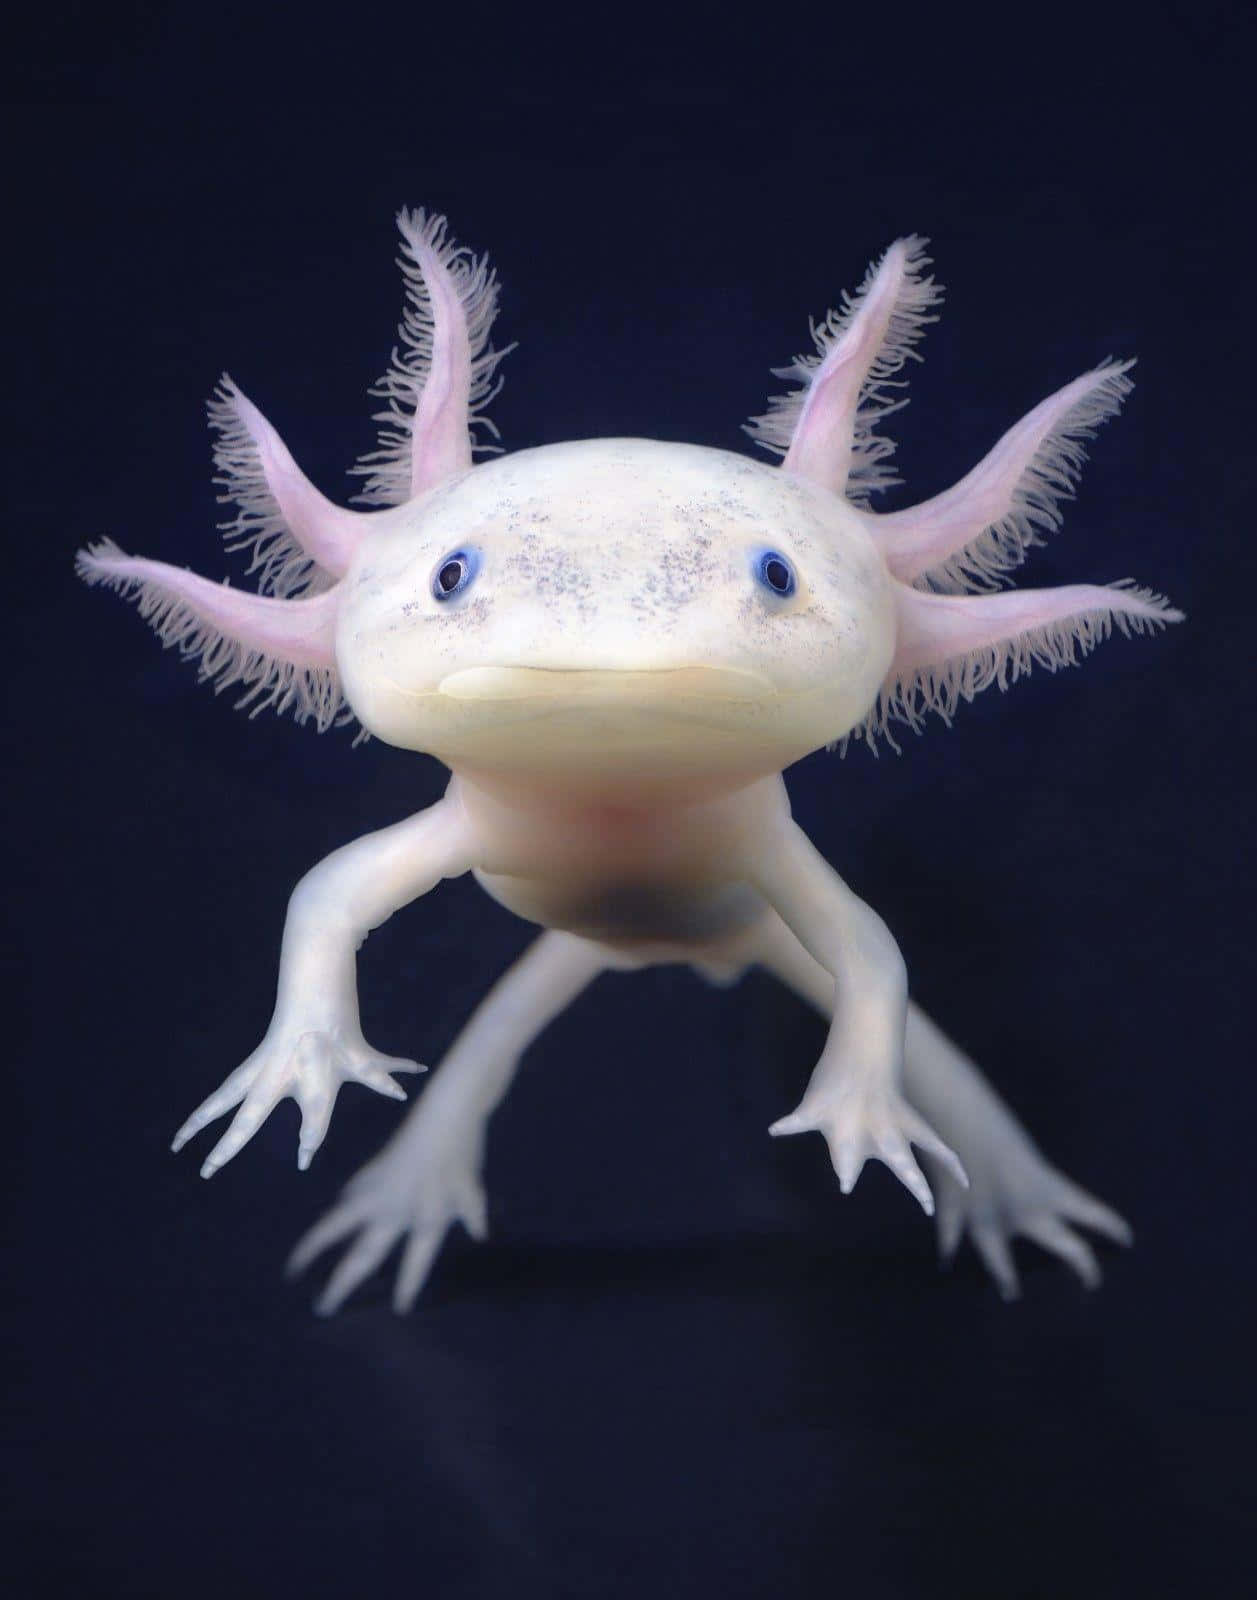 A White Axolotl With Long Legs And Long Tail